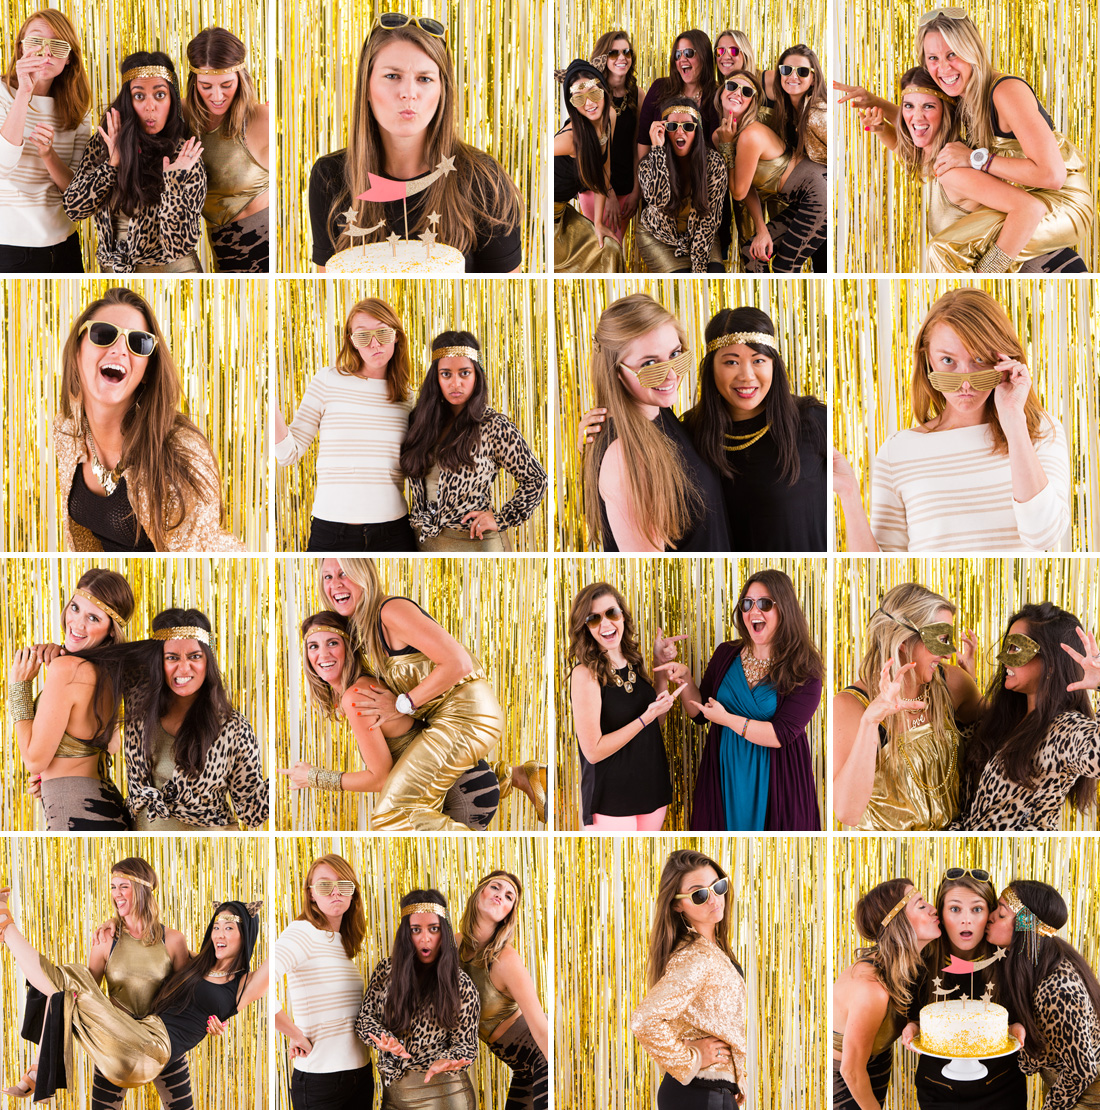 Multiple women are dressed in nice NYE party outfits and taking pictures in front of a DIY photo booth made of gold fringe curtains and spray paint.